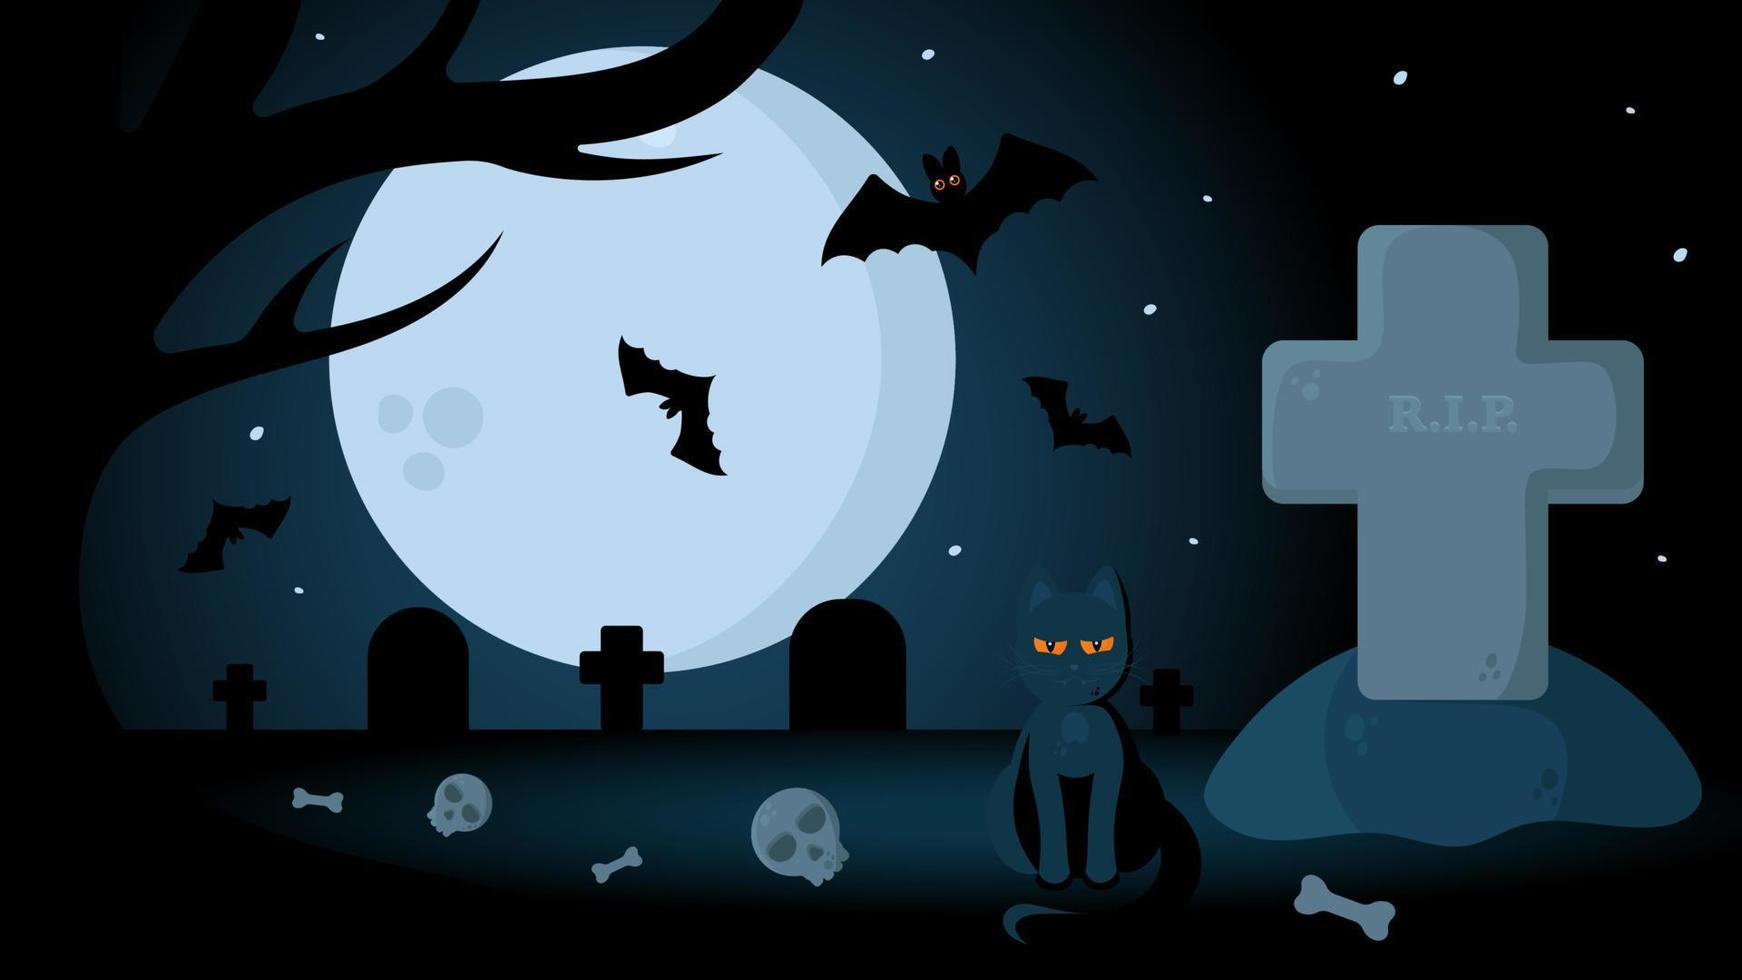 Halloween Vector Background With Night Cemetery Landscape. Full Moon, Graves, Skulls and Bones, Black Cat, Bats. Perfect for Web Sites, Printed Materials, Social Media, etc.